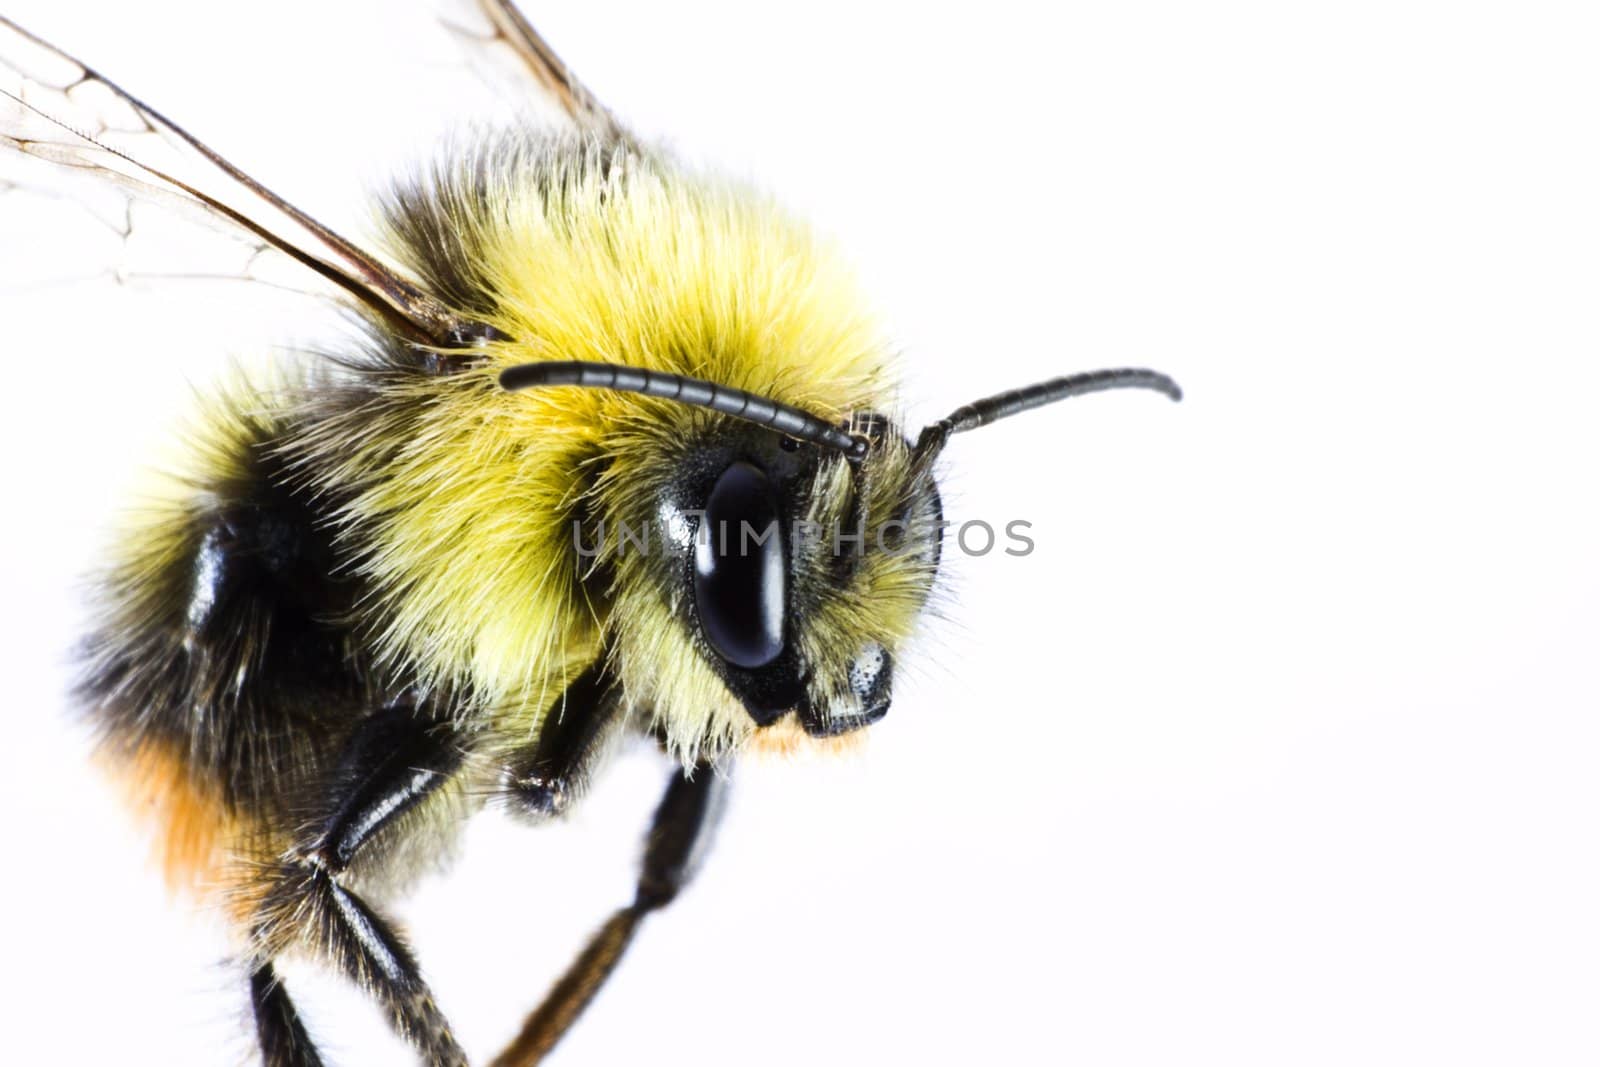 bumblebe in close up before nearly white background. 